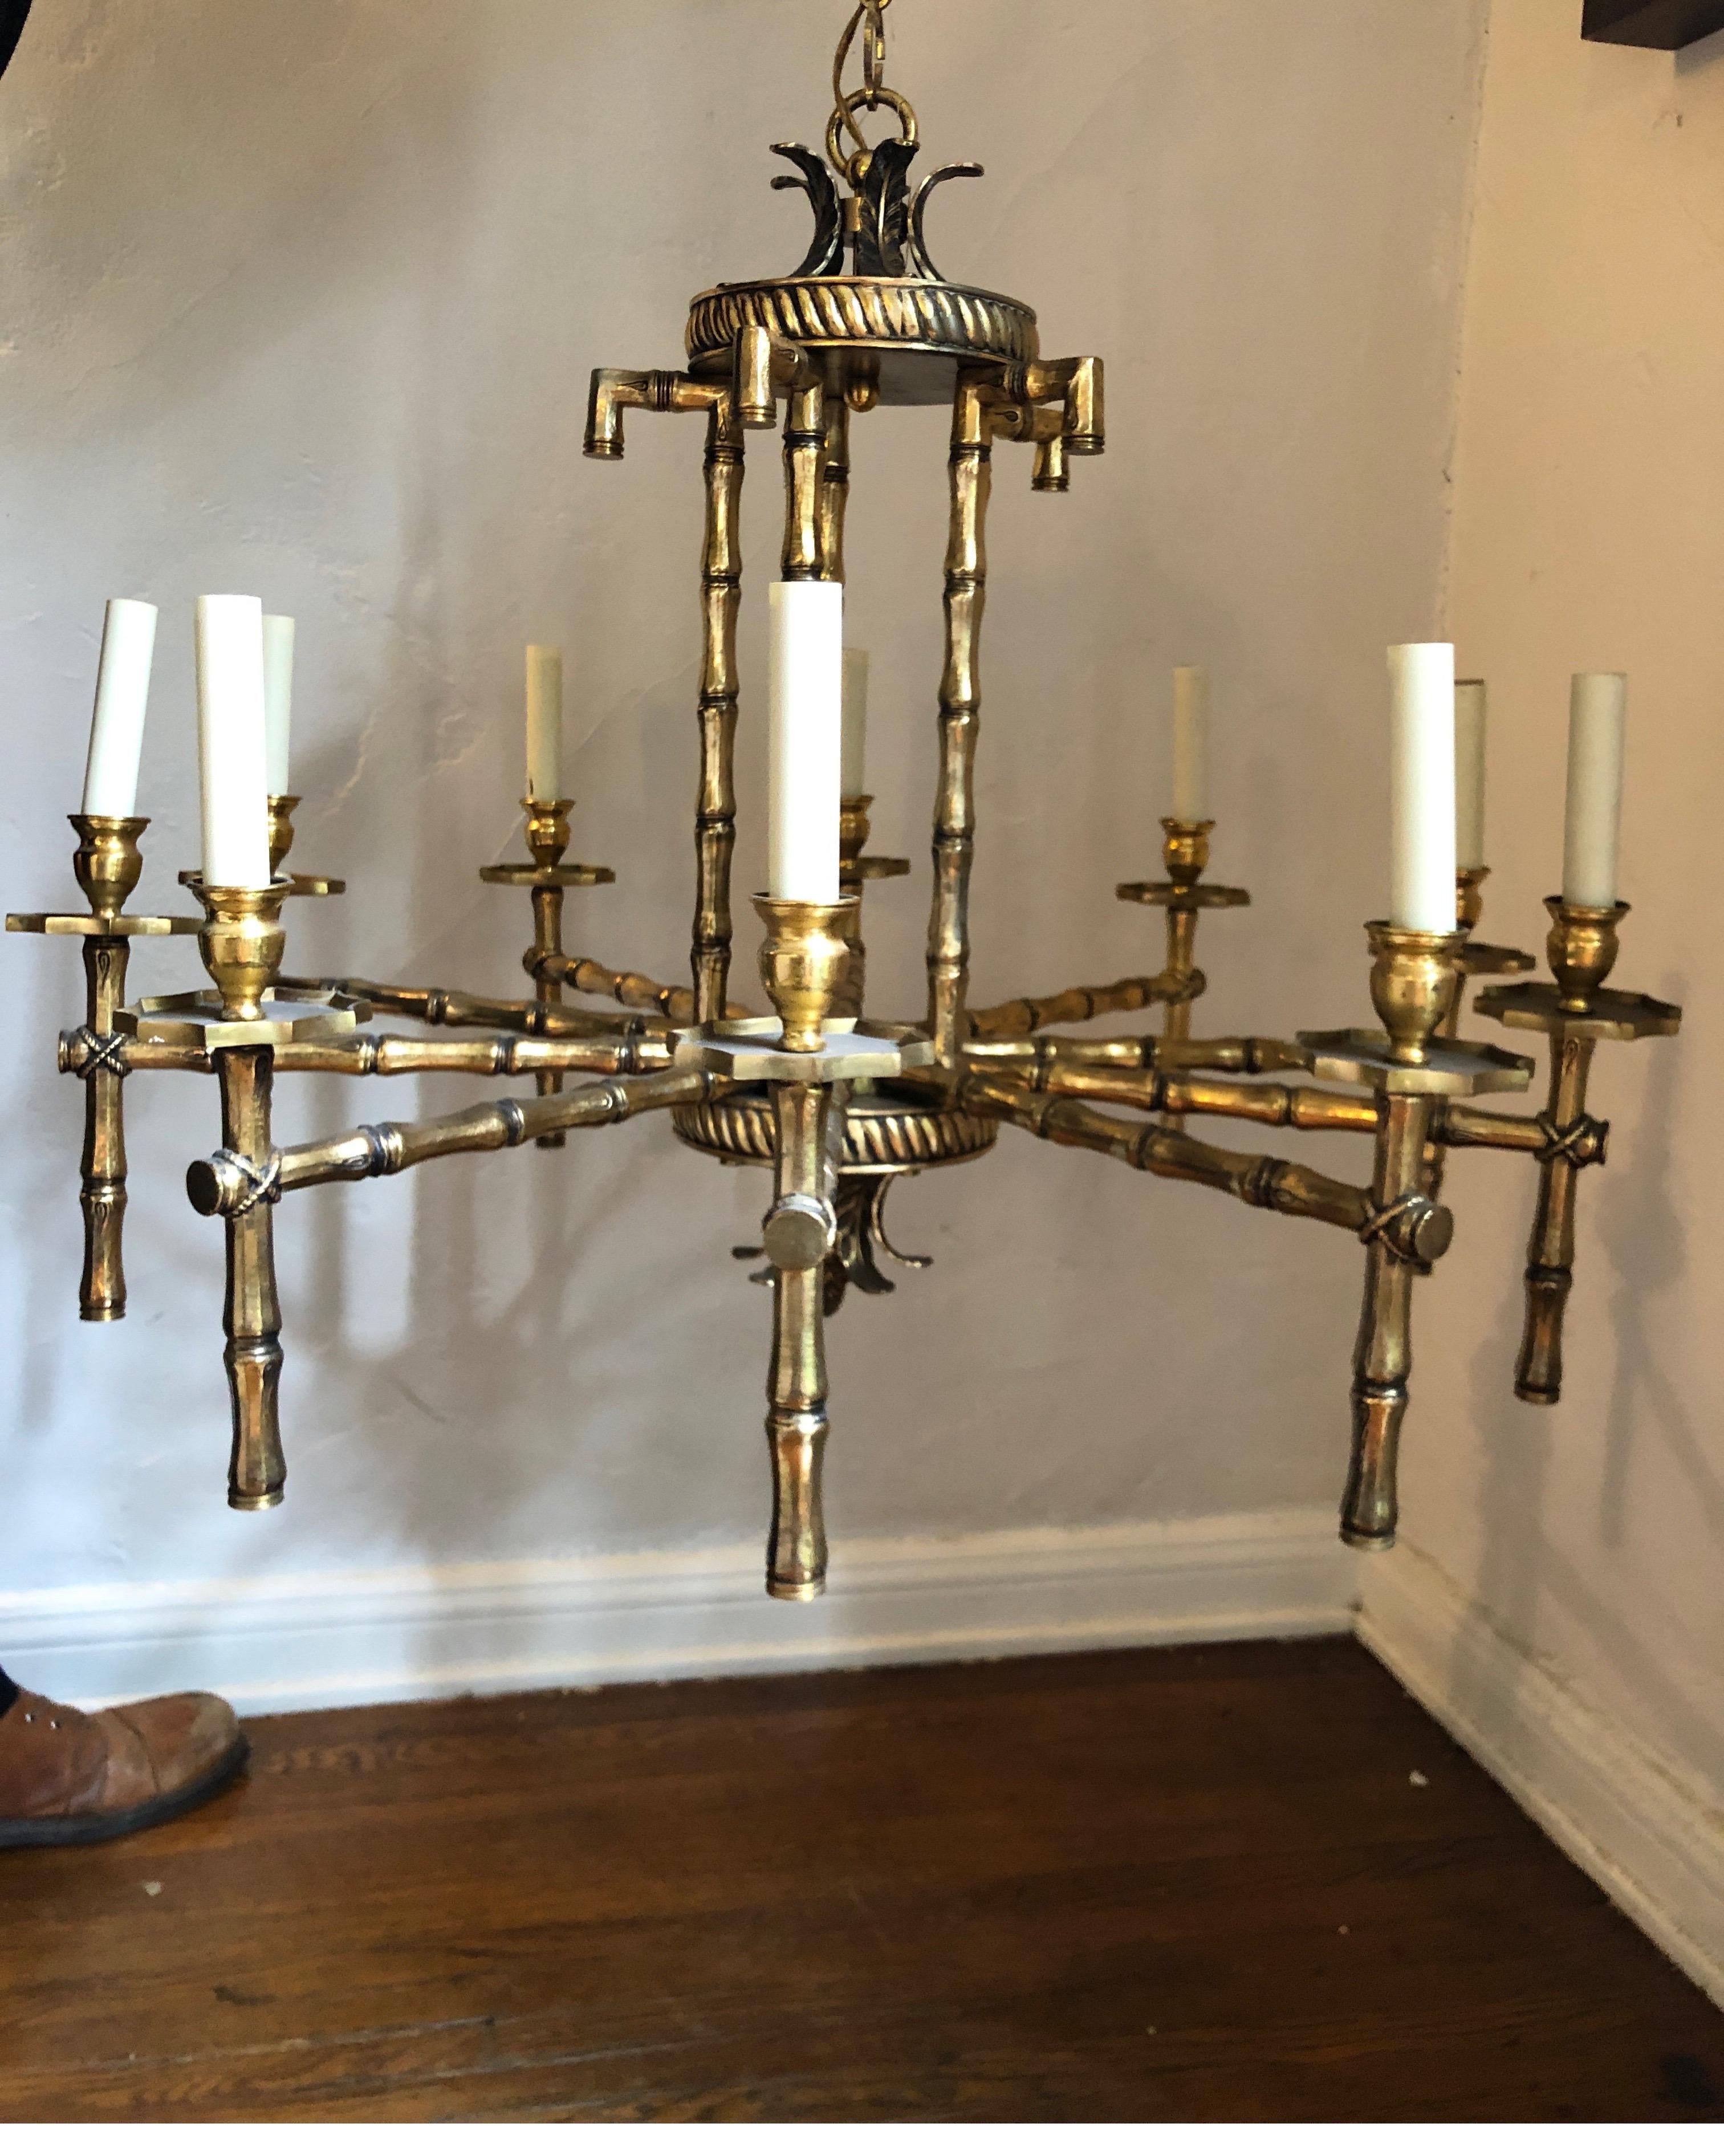 Italian faux brass pagoda chinoiserie style midcentury chandelier.
circa 1970s
10 lights total.